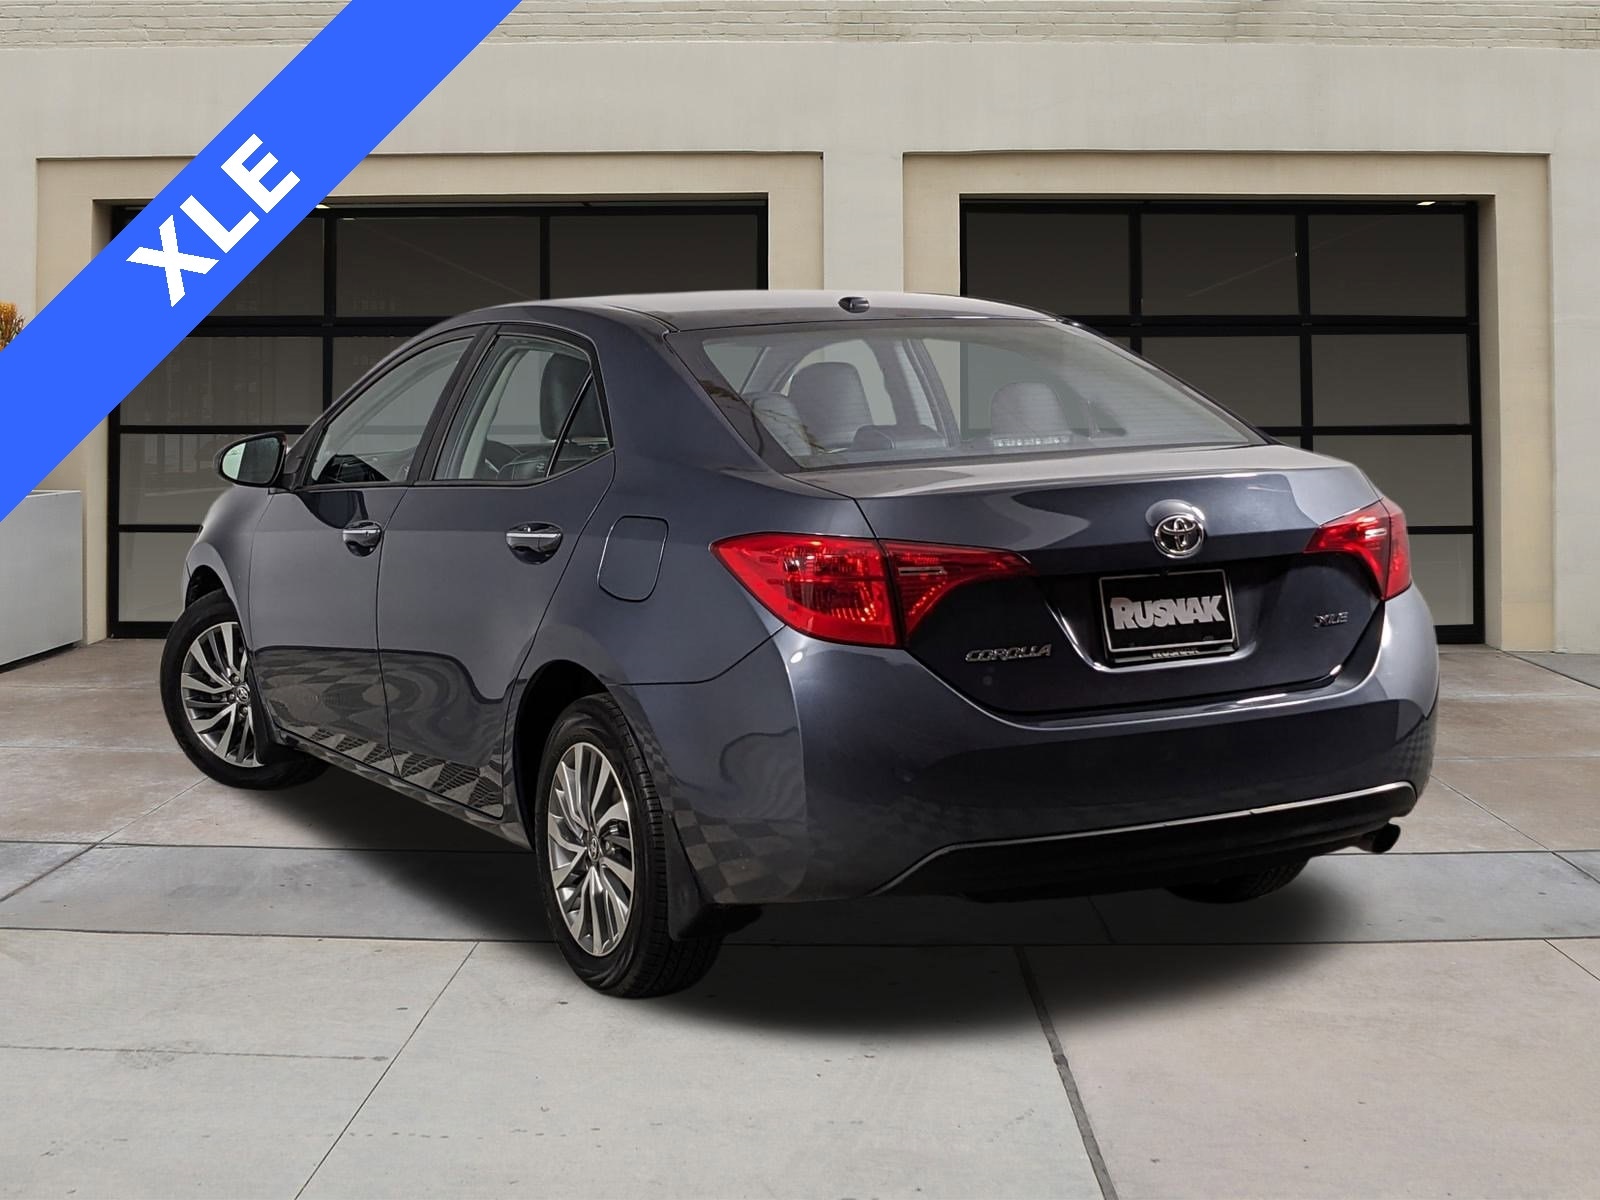 Used 2017 Toyota Corolla XLE with VIN 5YFBURHEXHP647086 for sale in Pasadena, CA